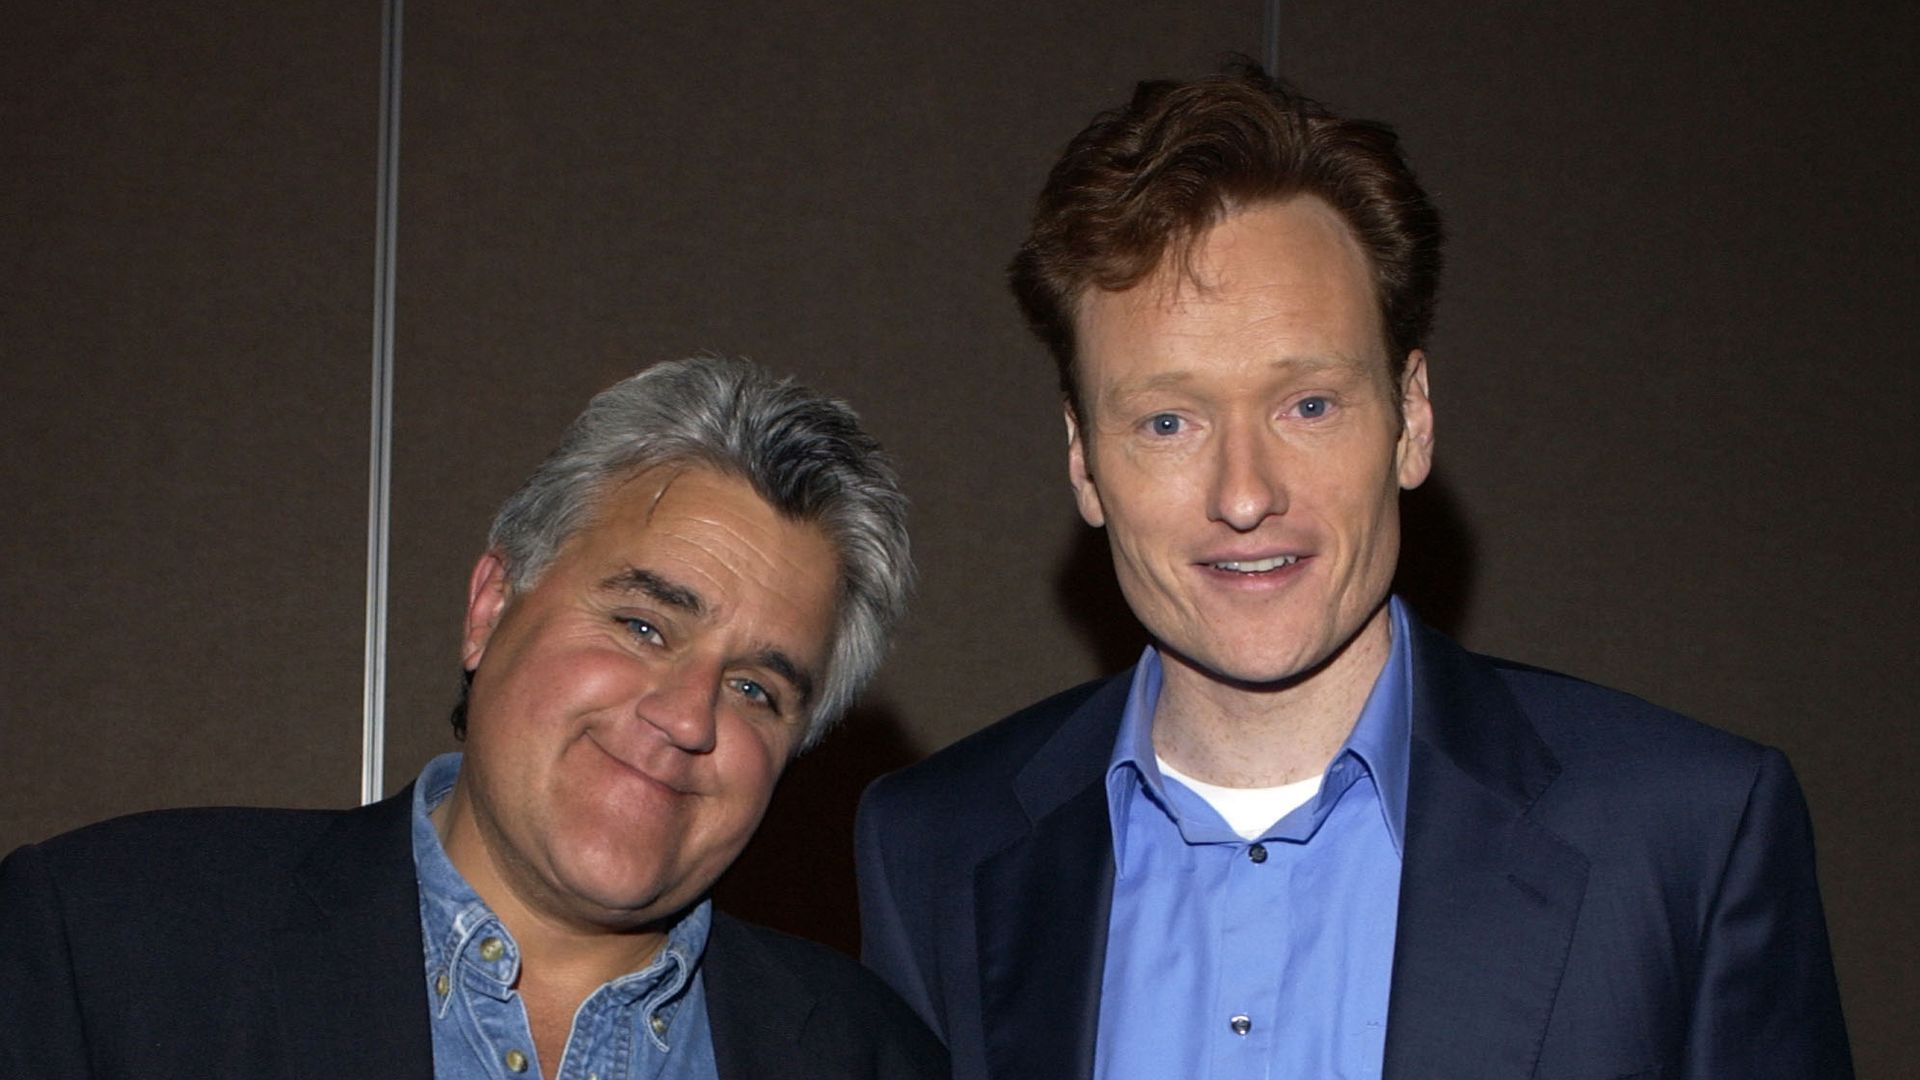 What to know about Conan O'Brien's scandalous Tonight Show exit after 'weird' return – and the million-dollar payout